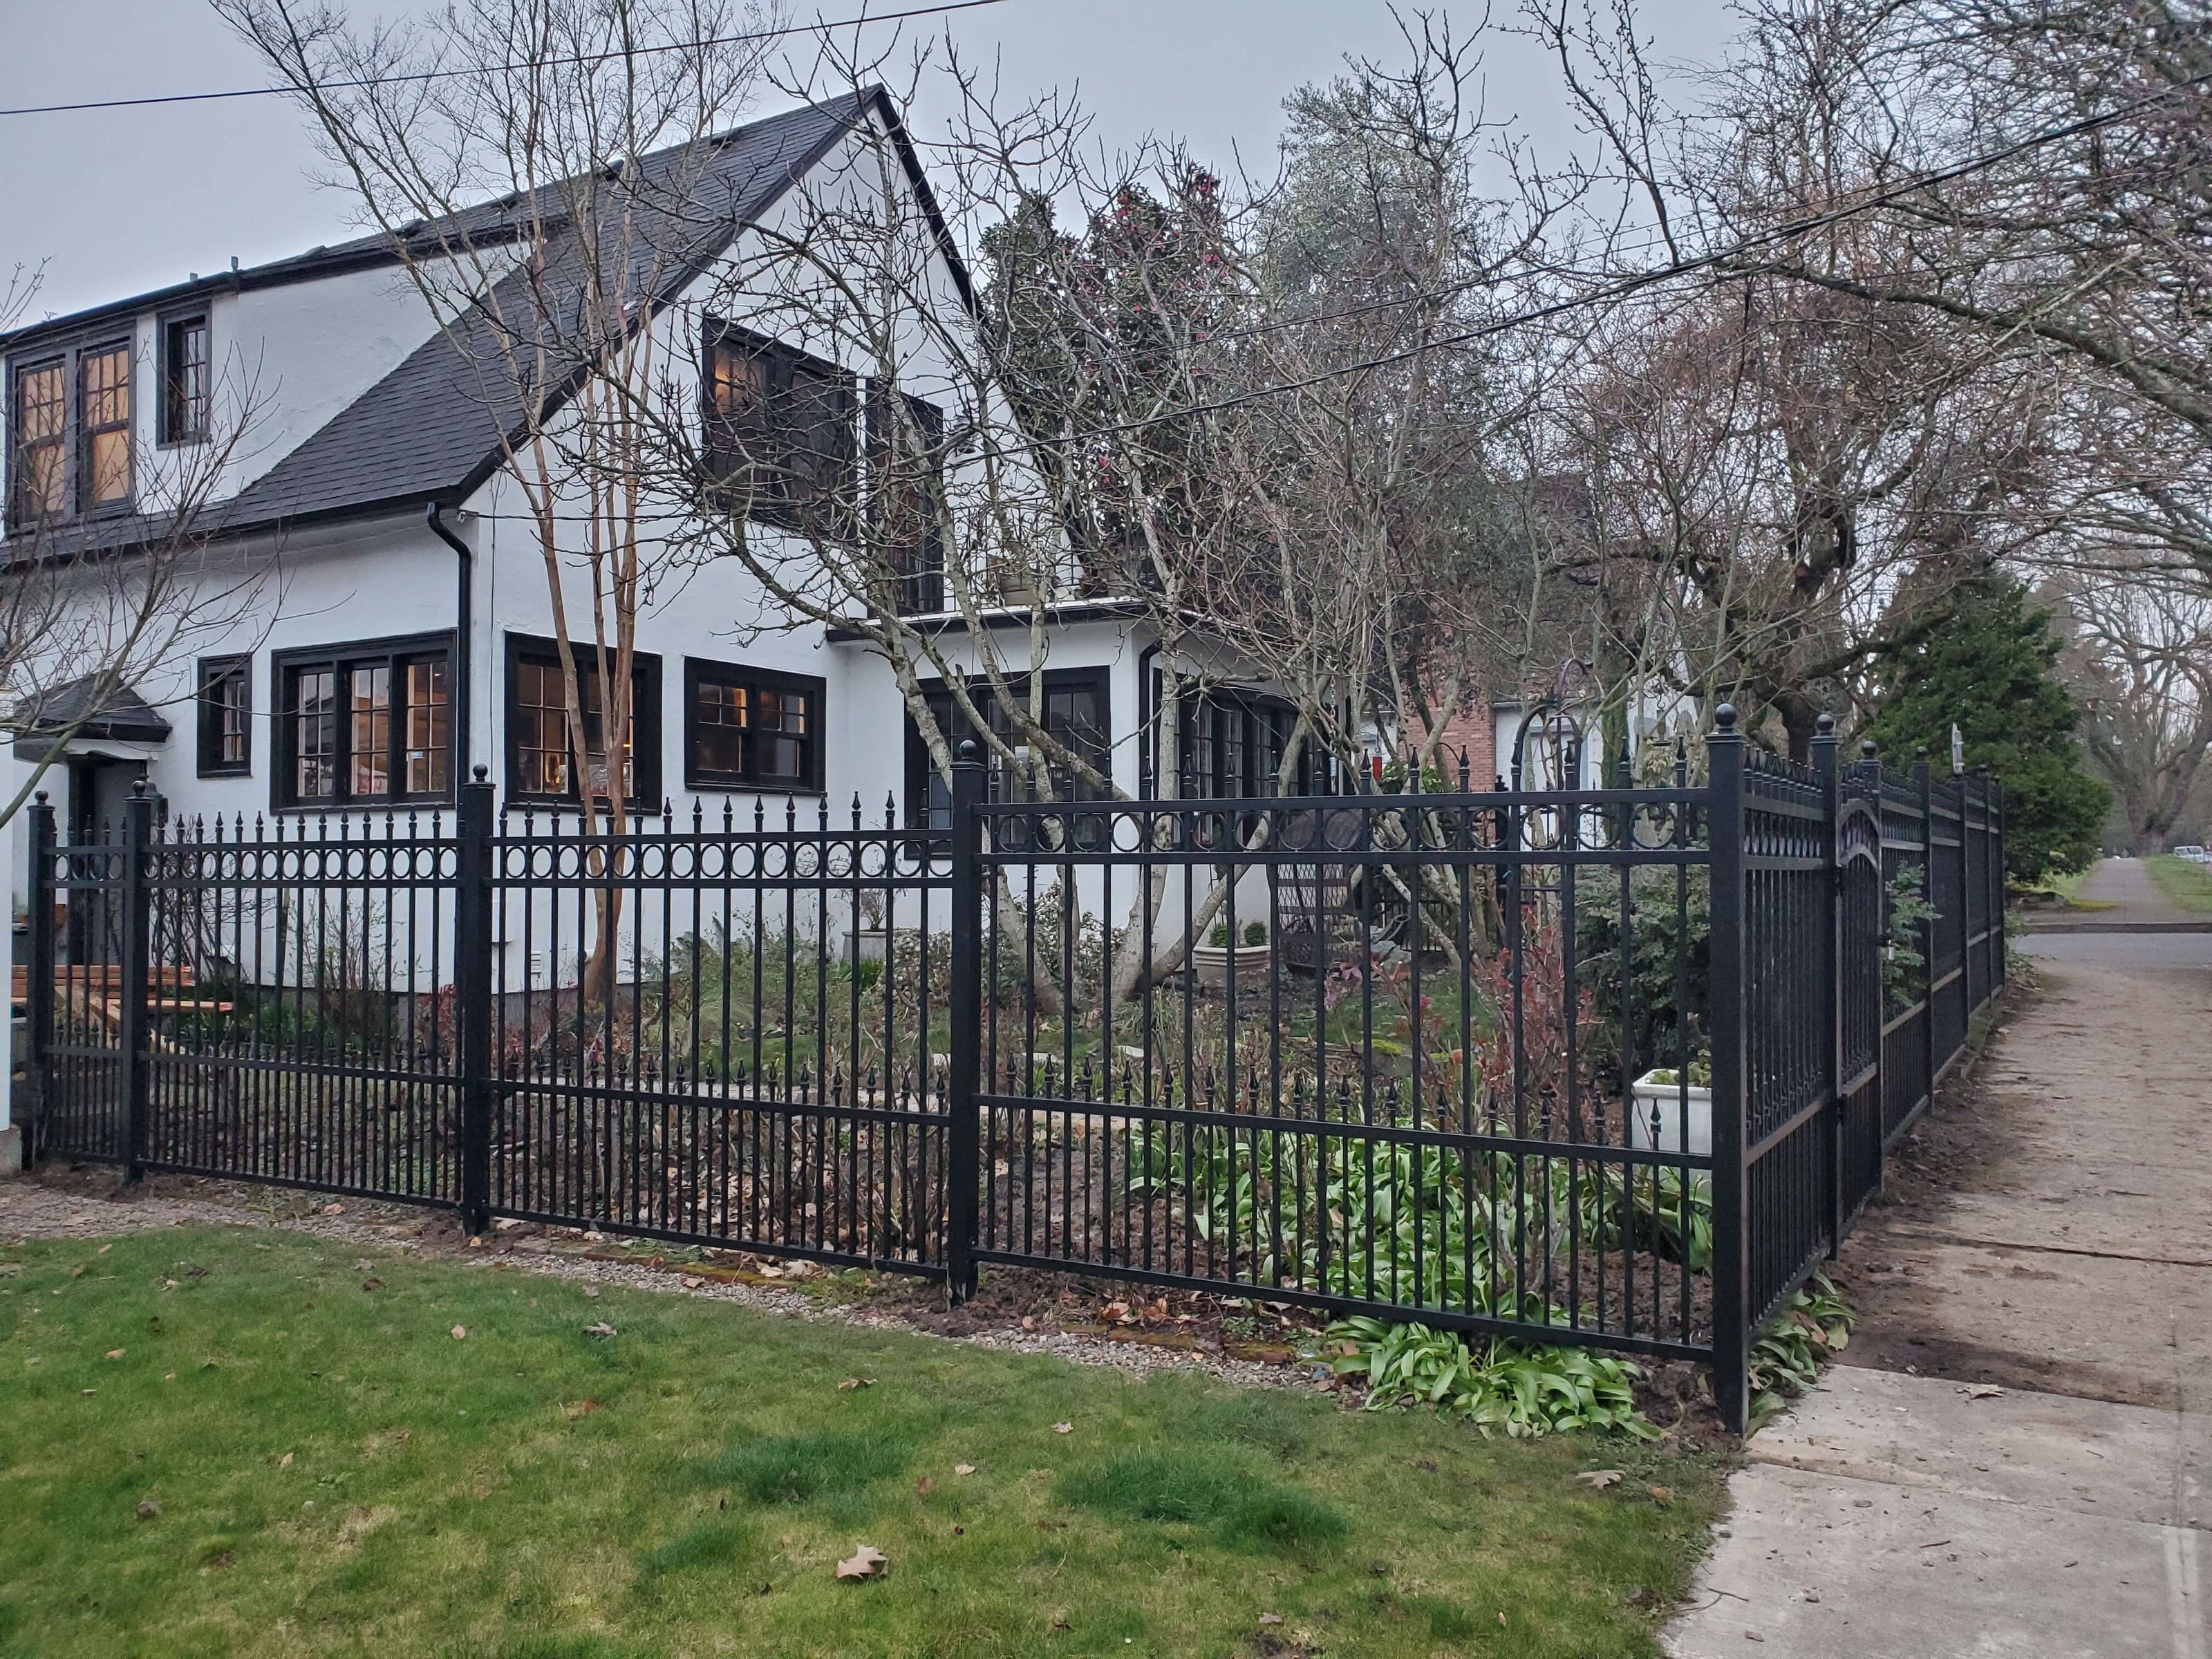 White brick house and garden surrounded by single black wrought iron fence with a row of circles trimming the top and spear point finials. Ball finials on fence posts.